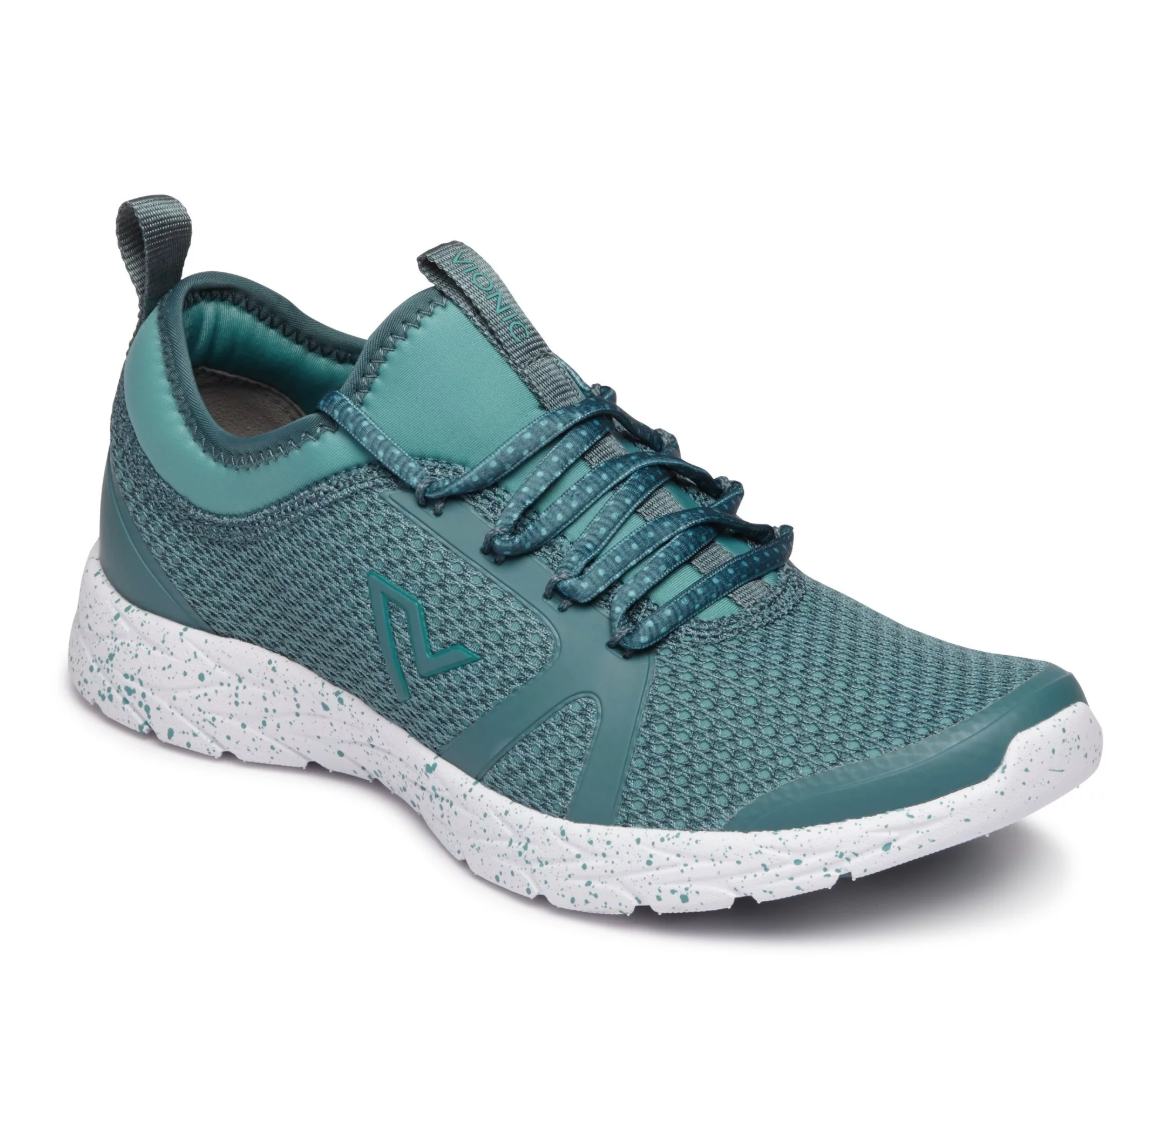 most comfortable athletic shoes for women